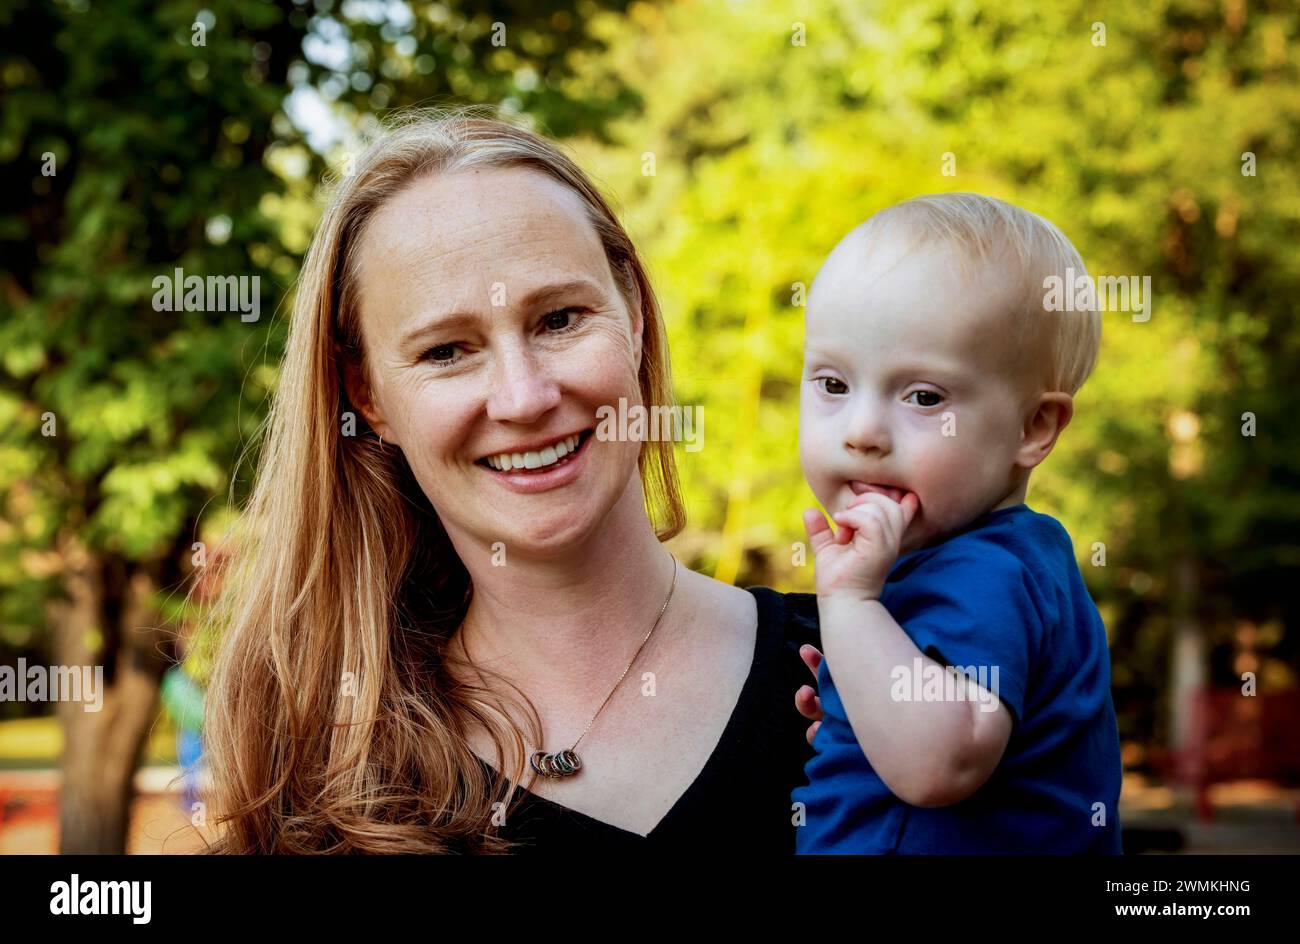 Mother spending quality time with her young son who has Down Syndrome in a city park during an autumn day; Leduc, Alberta, Canada Stock Photo